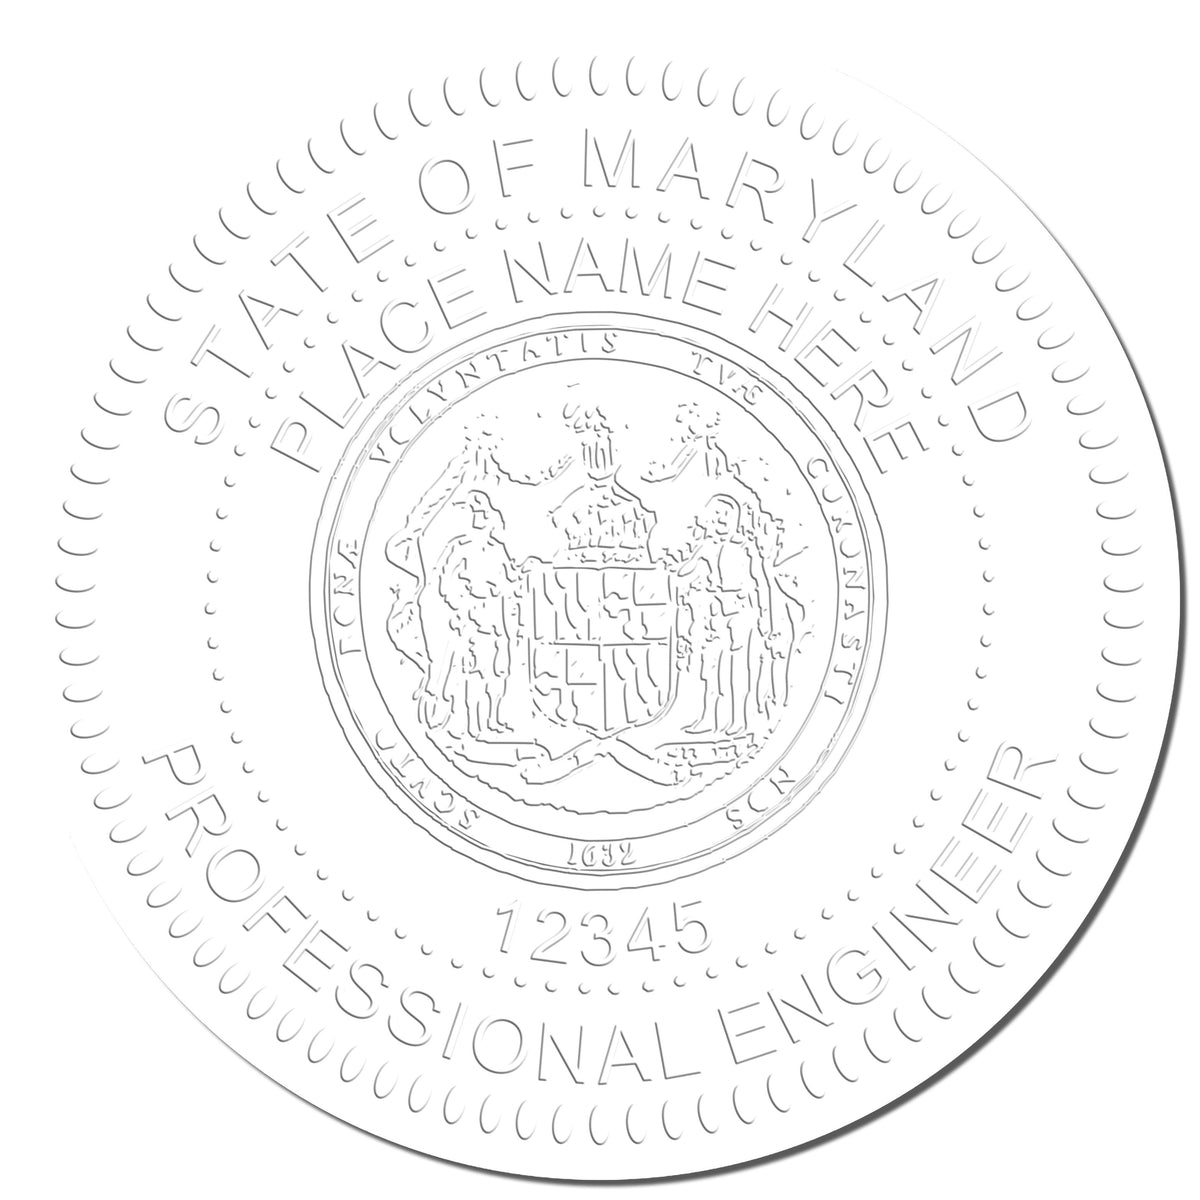 This paper is stamped with a sample imprint of the Gift Maryland Engineer Seal, signifying its quality and reliability.